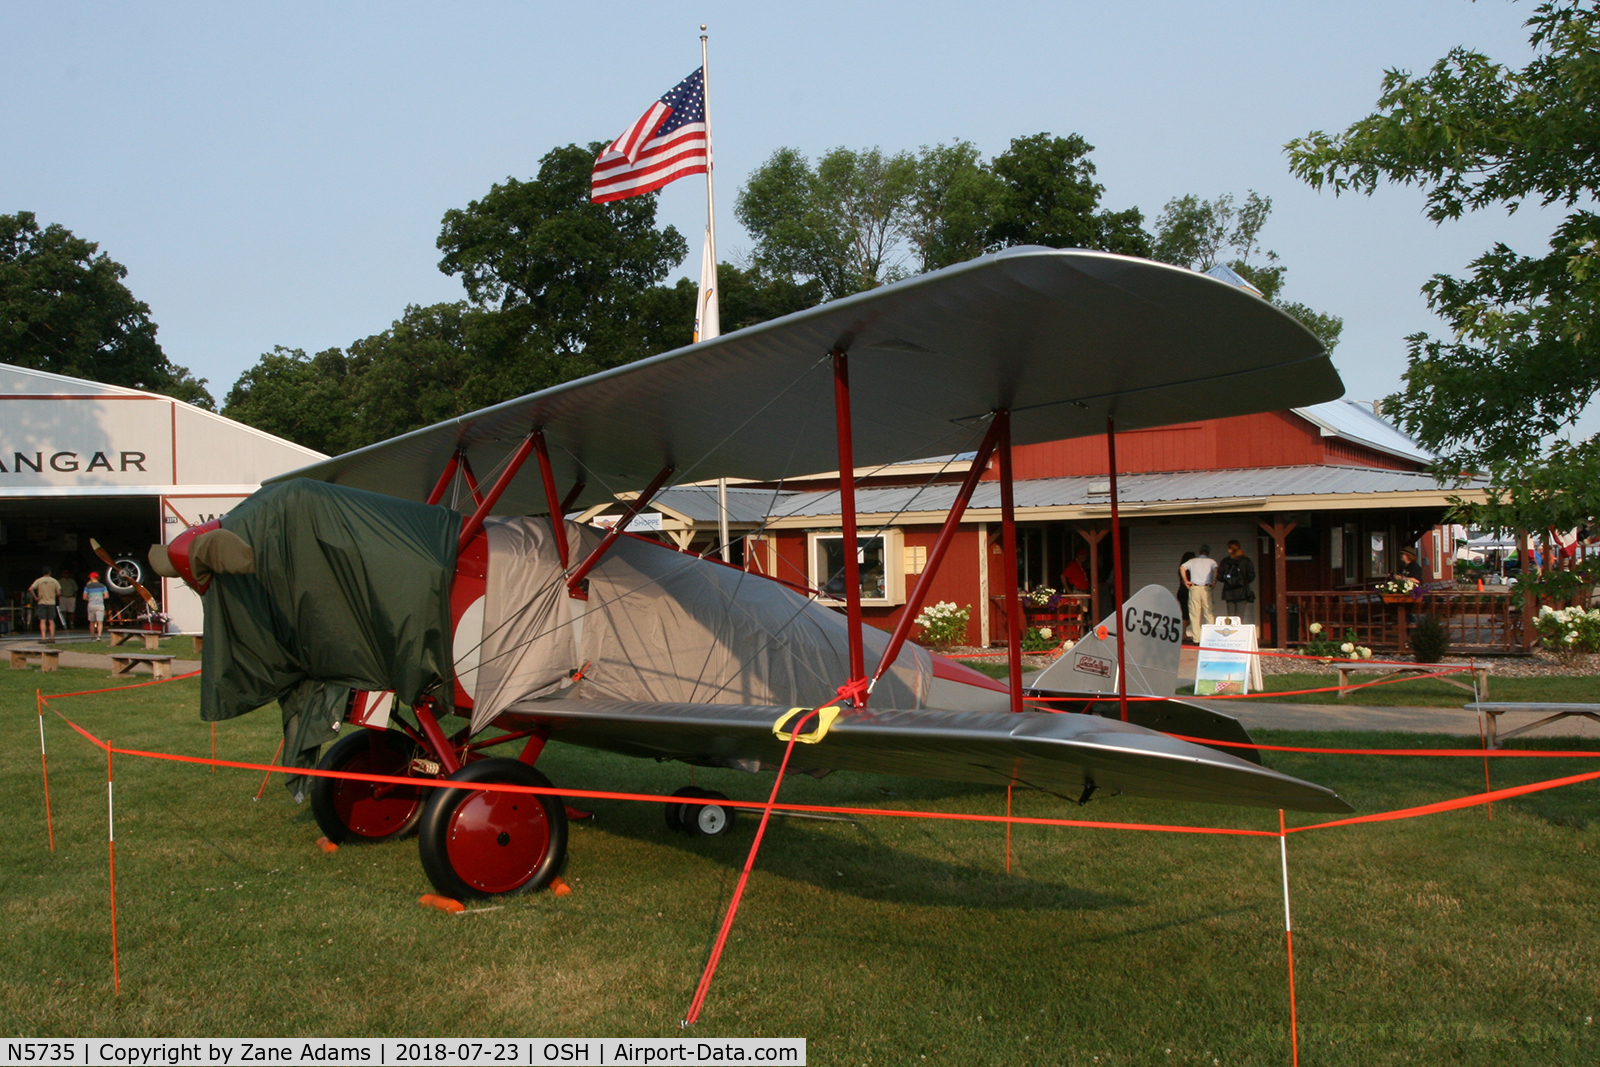 N5735, Lincoln Page 1928 C/N 212, At the 2018 EAA AirVenture - Oshkosh, Wisconsin